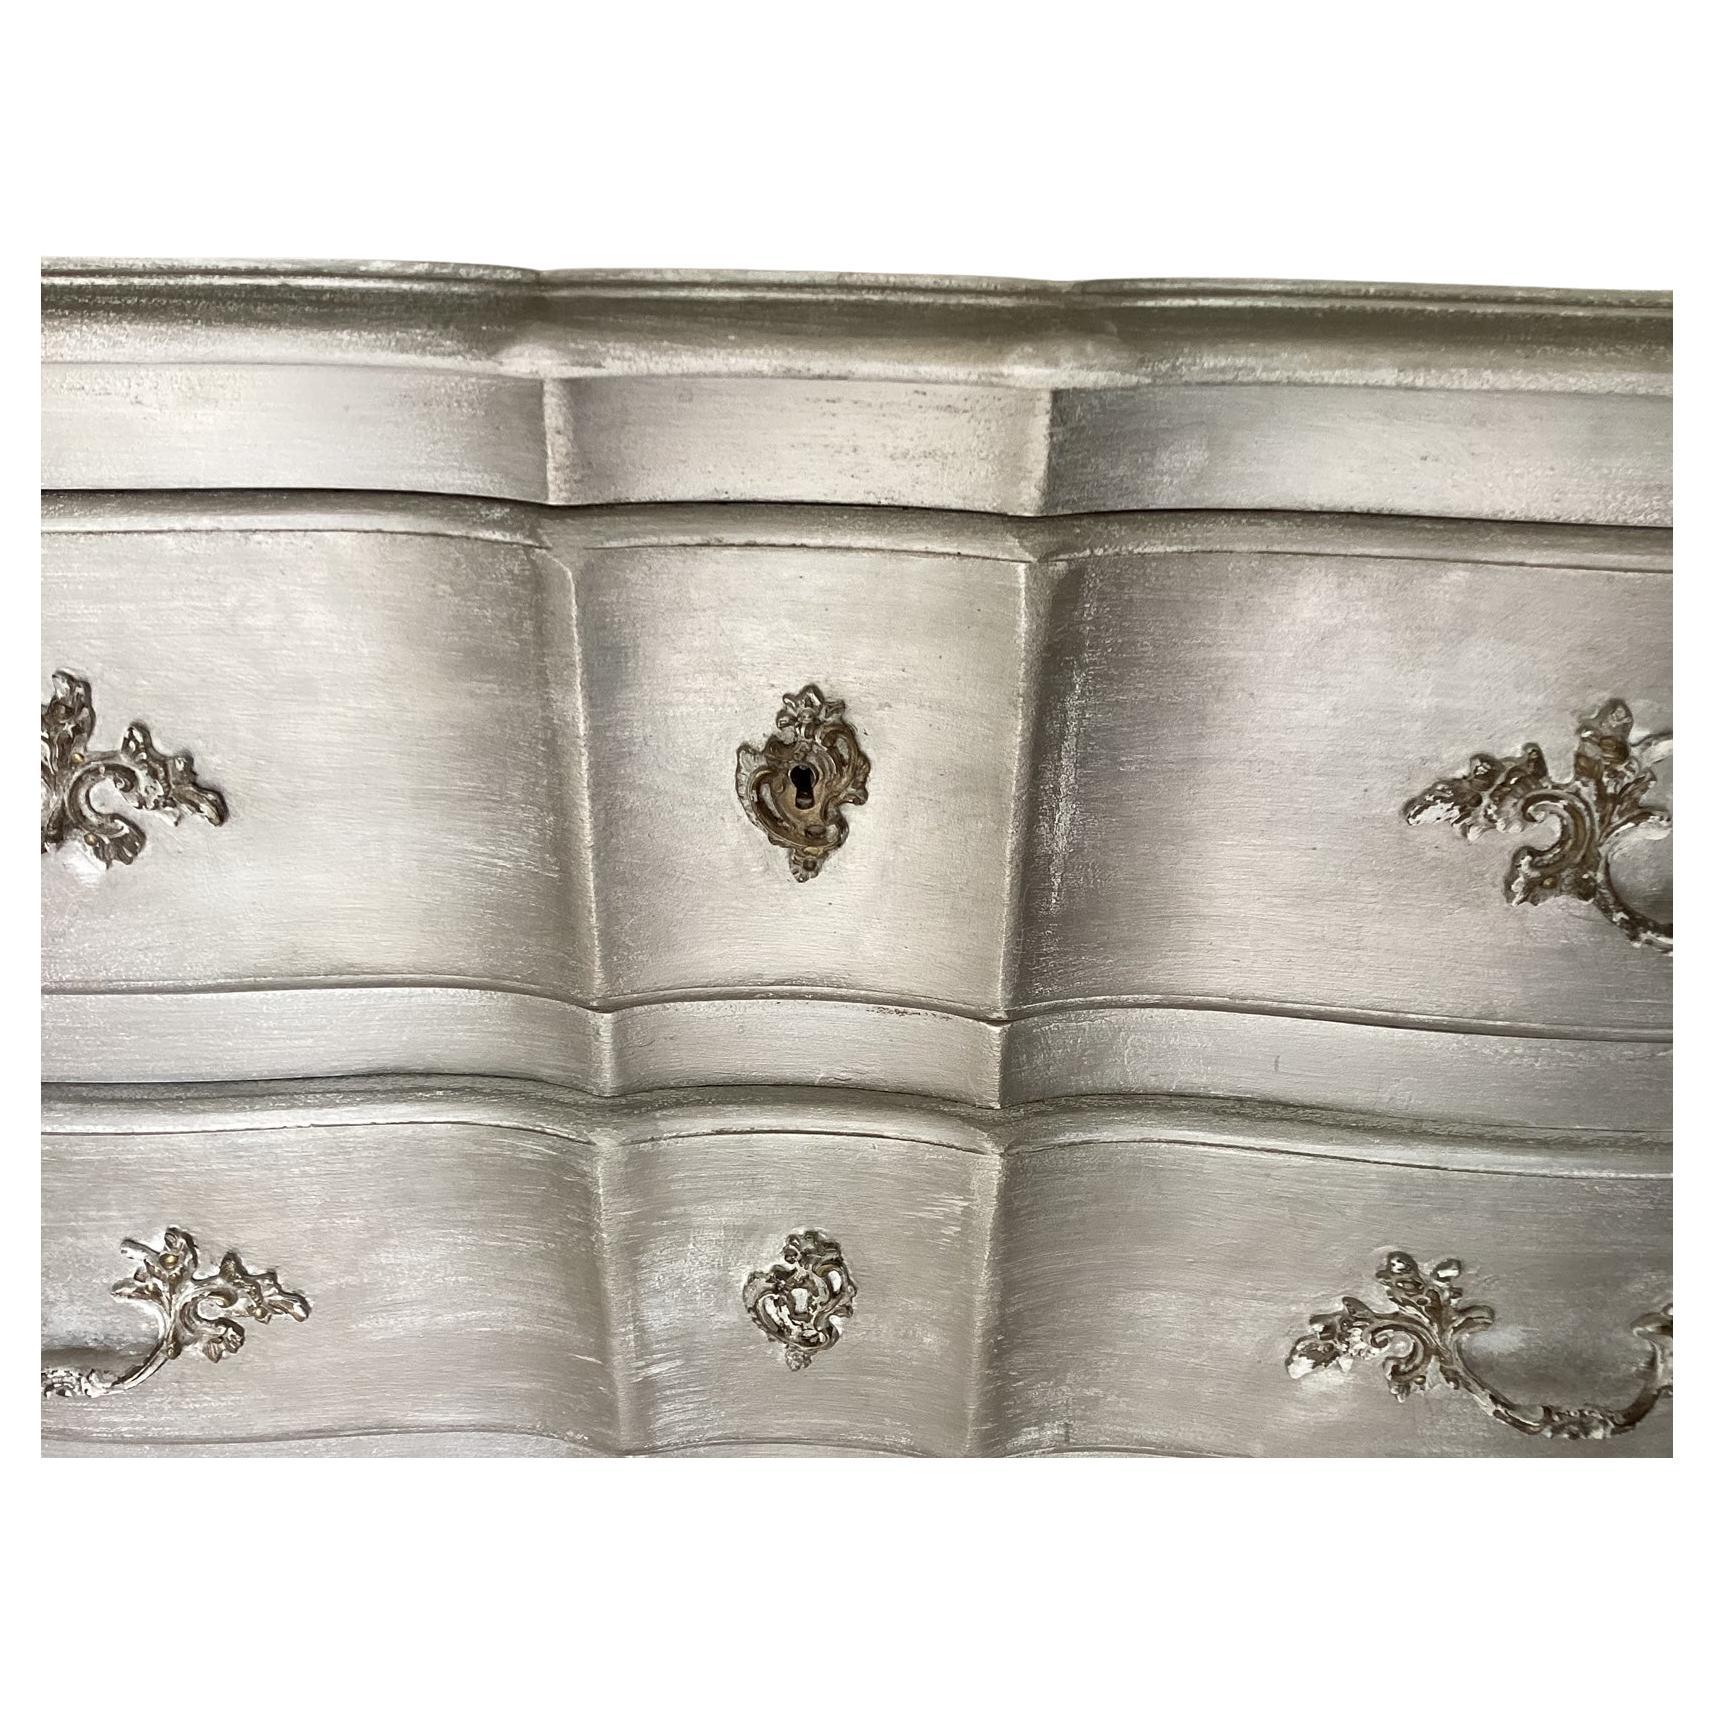 Traditional French chest given a new glam look with shimmering silver paint. There are 3 drawers for storage, original drawer pulls and key entry hardware. The front is slightly wavy for added elegance and the sides feature arched panels.

Danielle